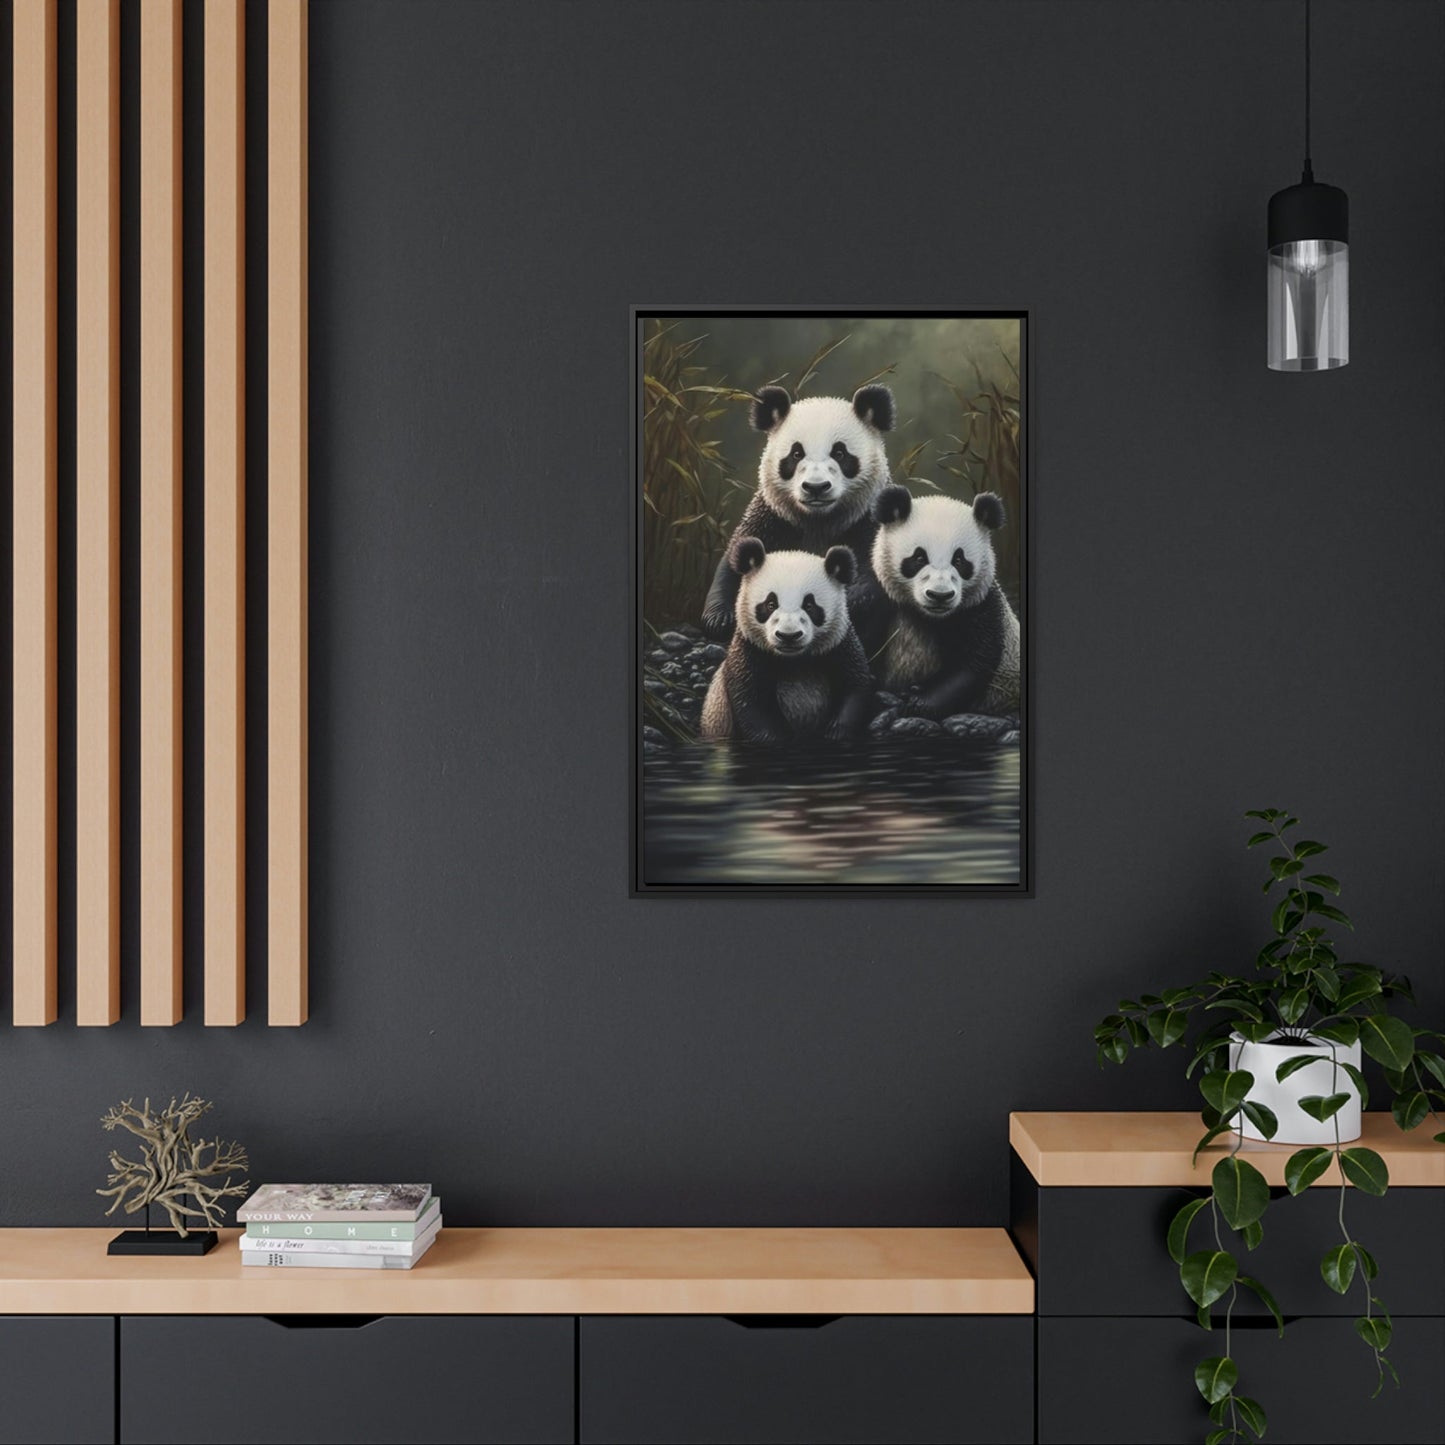 A Window to the World of Pandas: A Canvas That Captures their Spirit